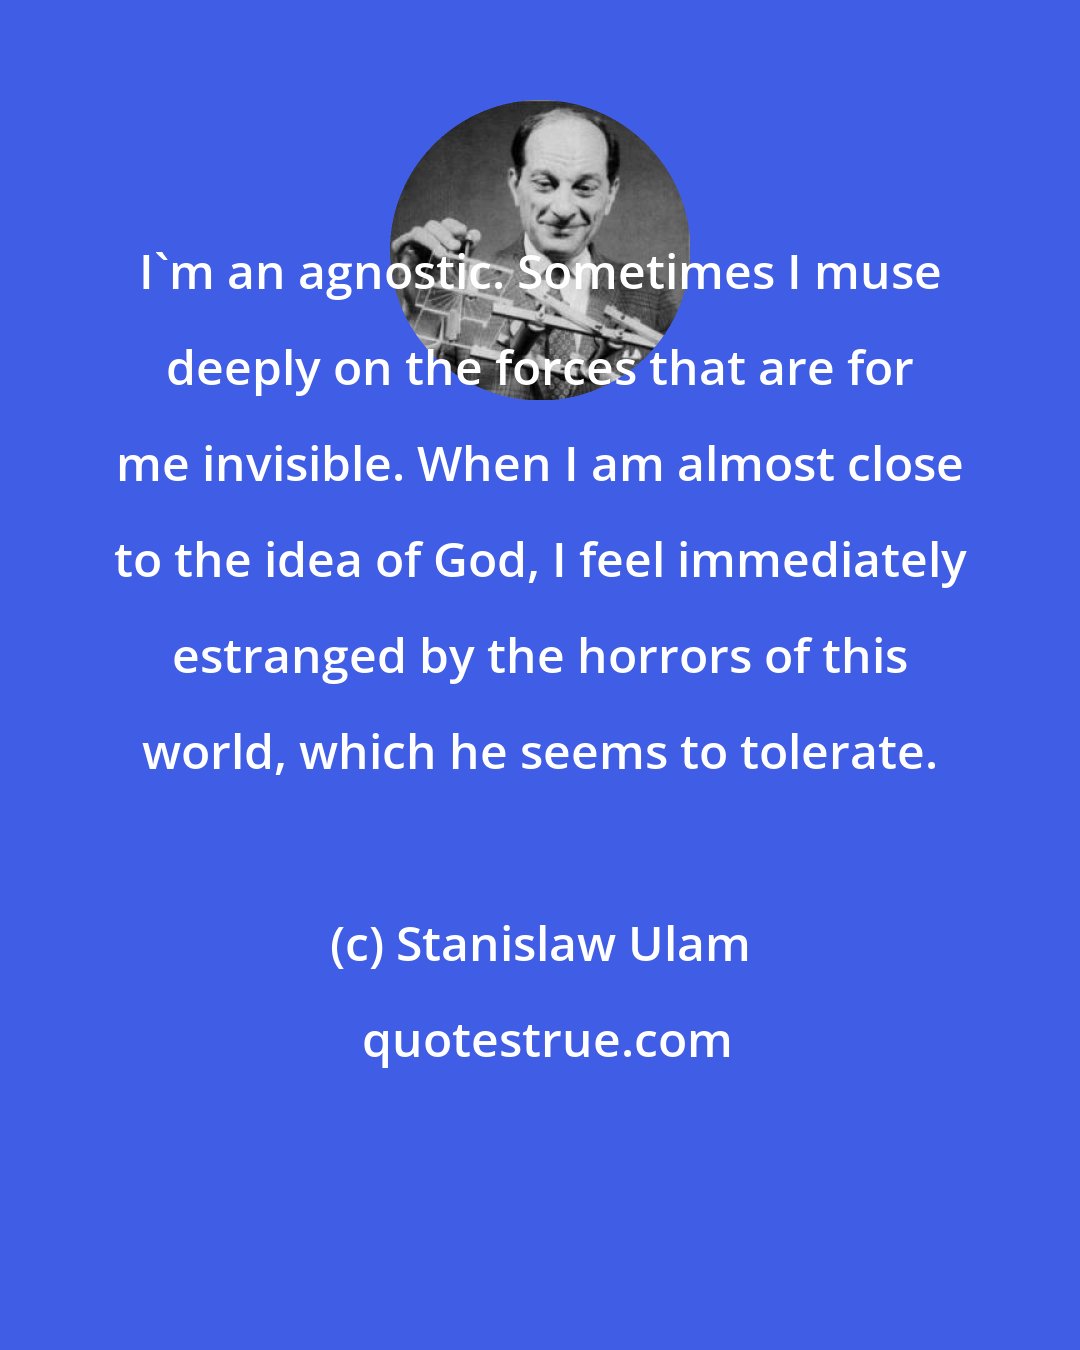 Stanislaw Ulam: I'm an agnostic. Sometimes I muse deeply on the forces that are for me invisible. When I am almost close to the idea of God, I feel immediately estranged by the horrors of this world, which he seems to tolerate.